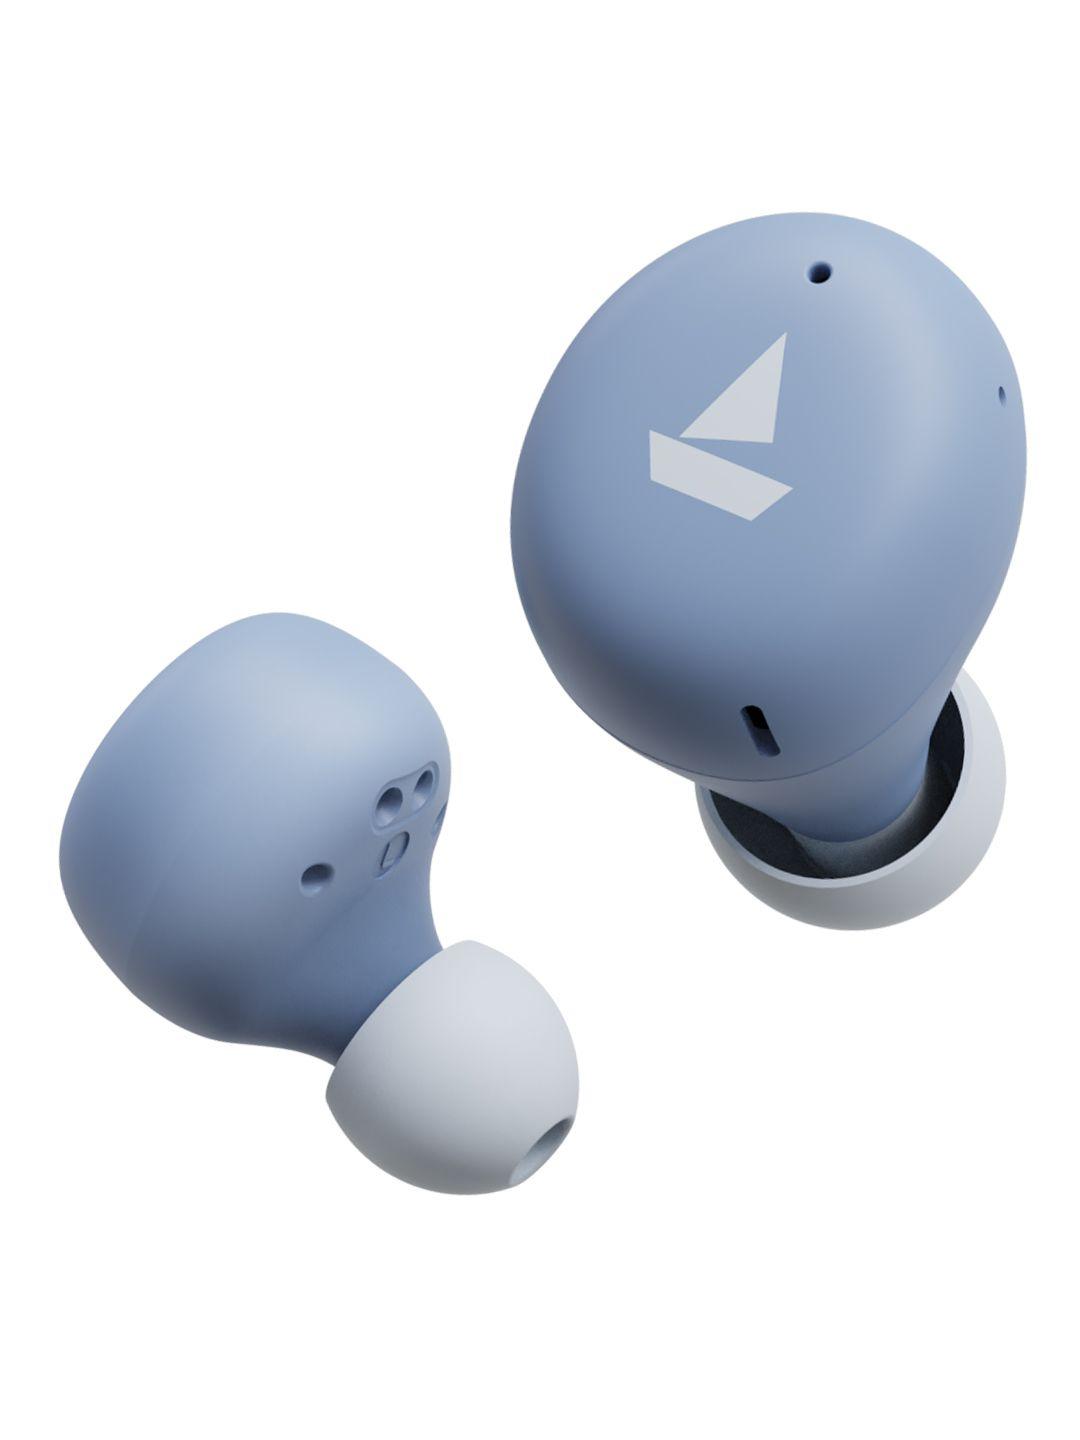 boat mint purple airdopes 381 m tws earbuds with up to 20h playback